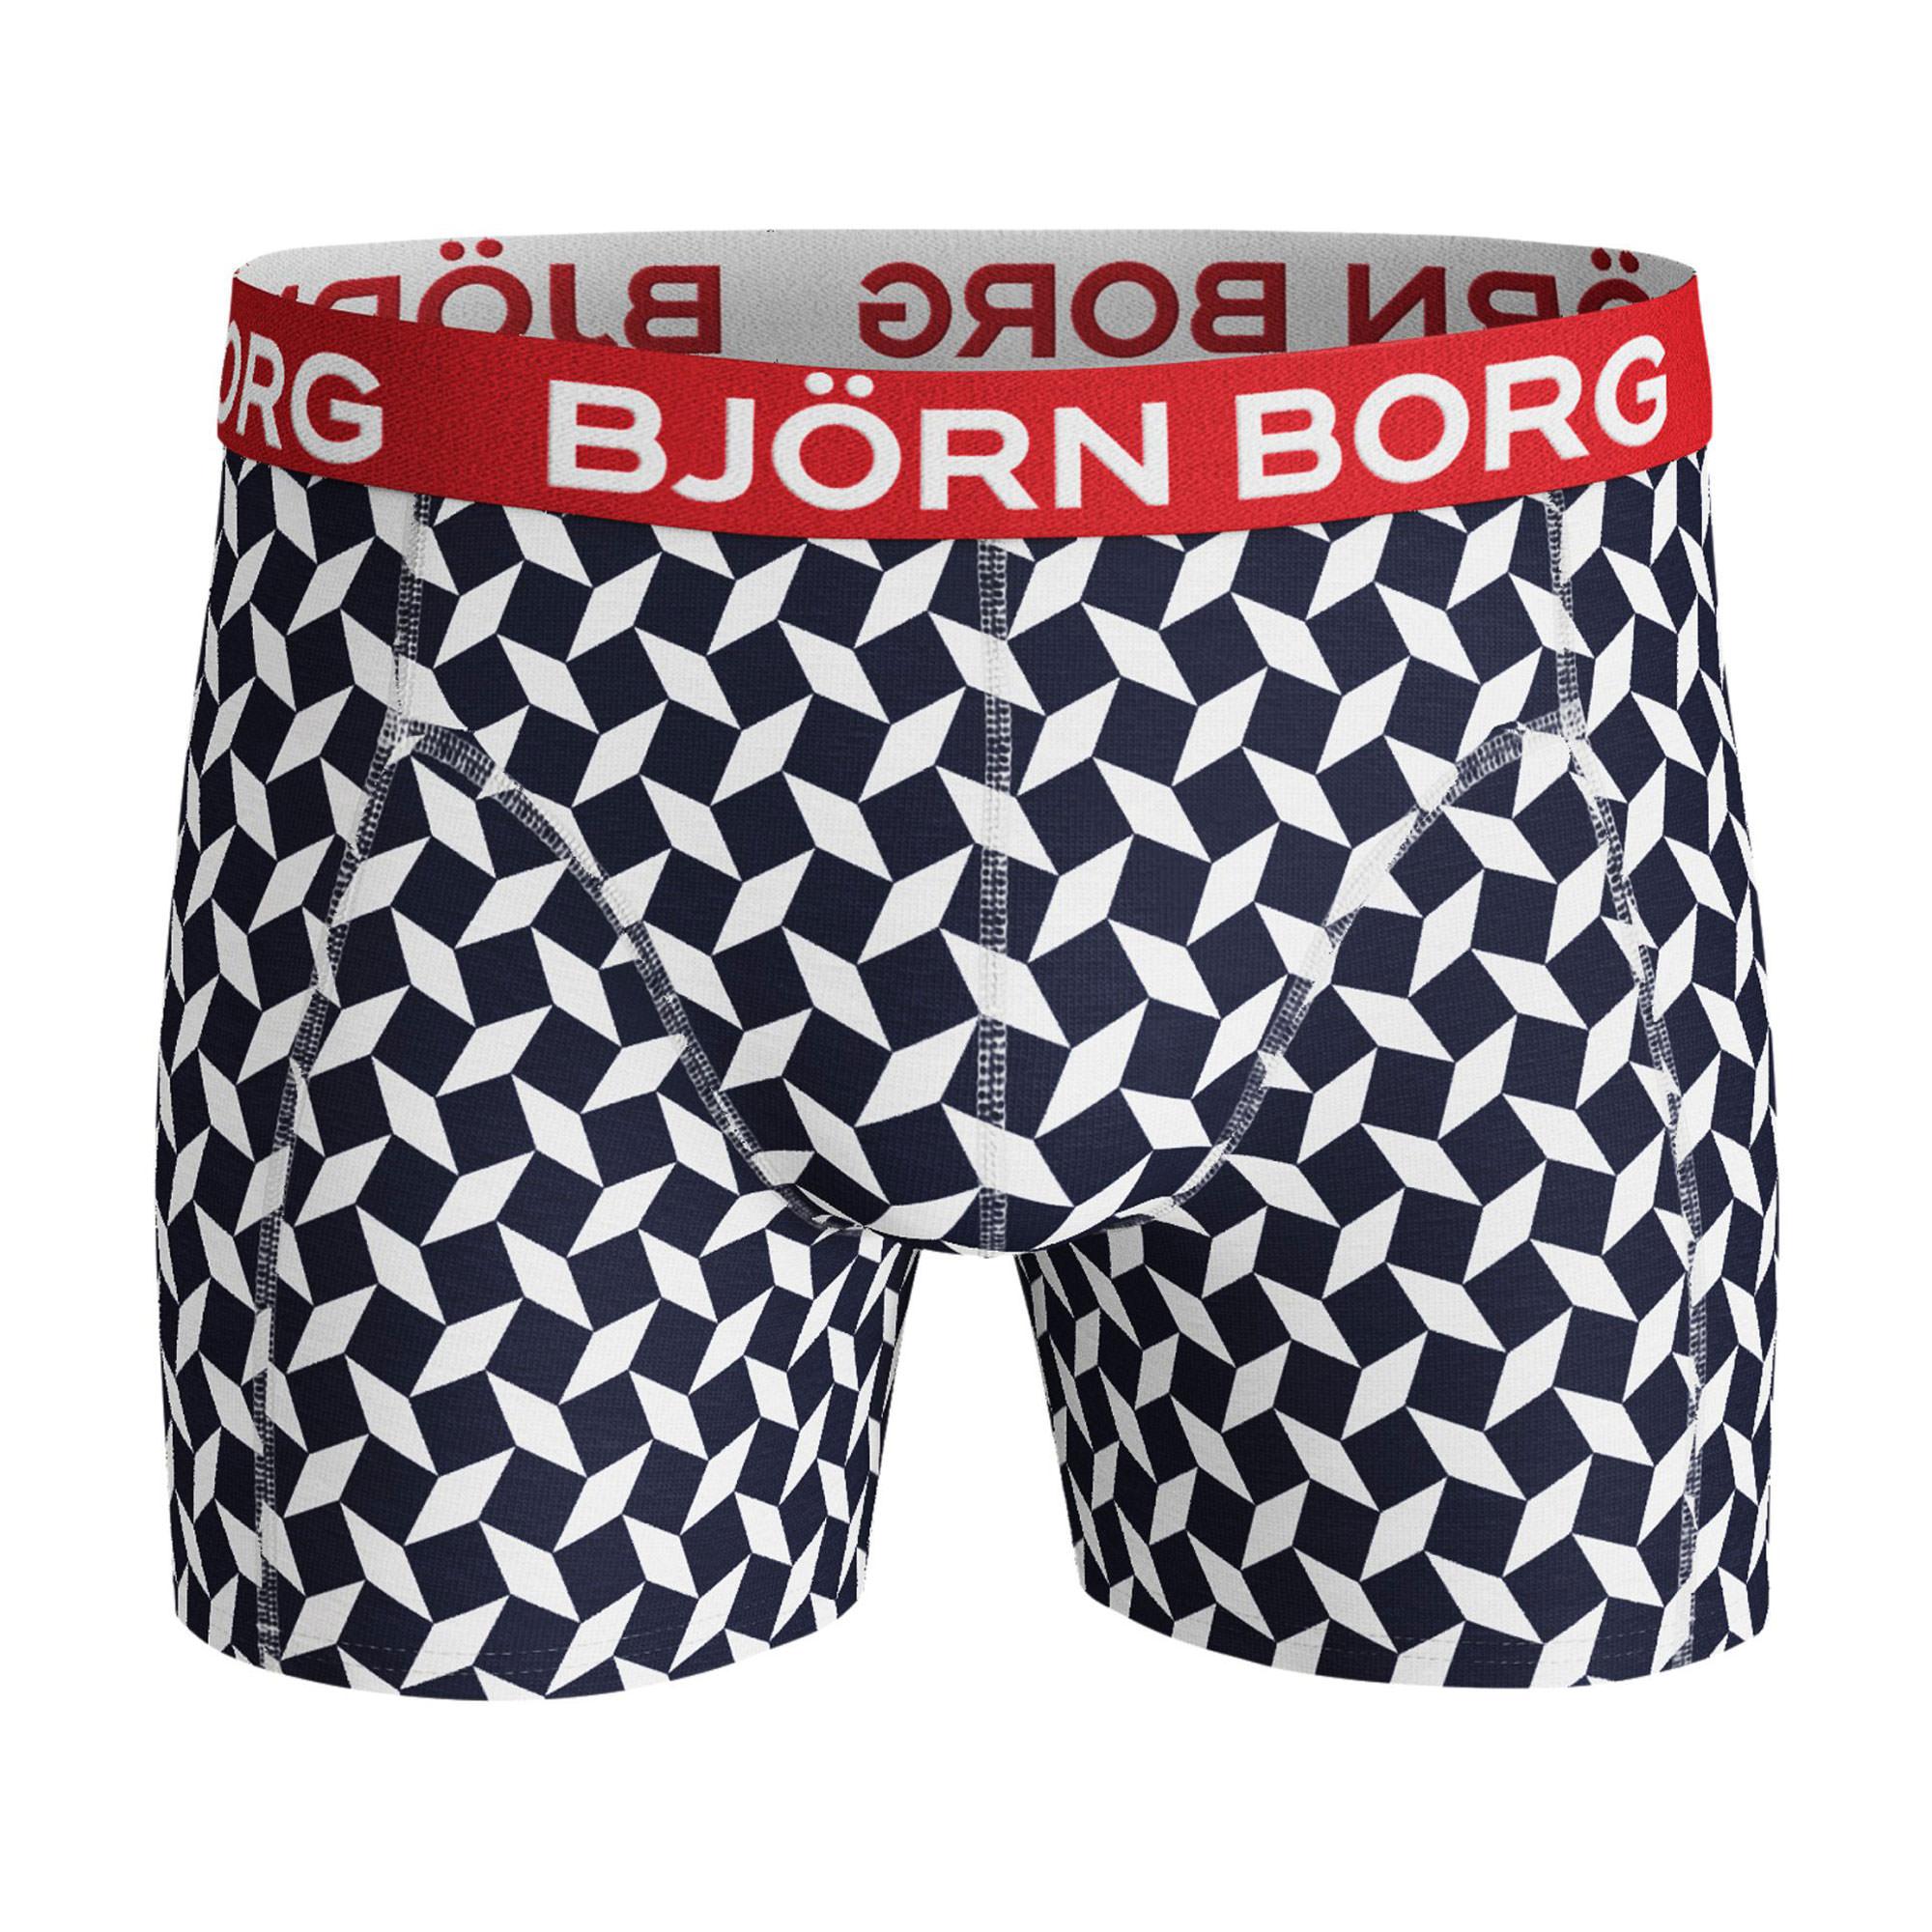 Two-Piece Square Print Boxers